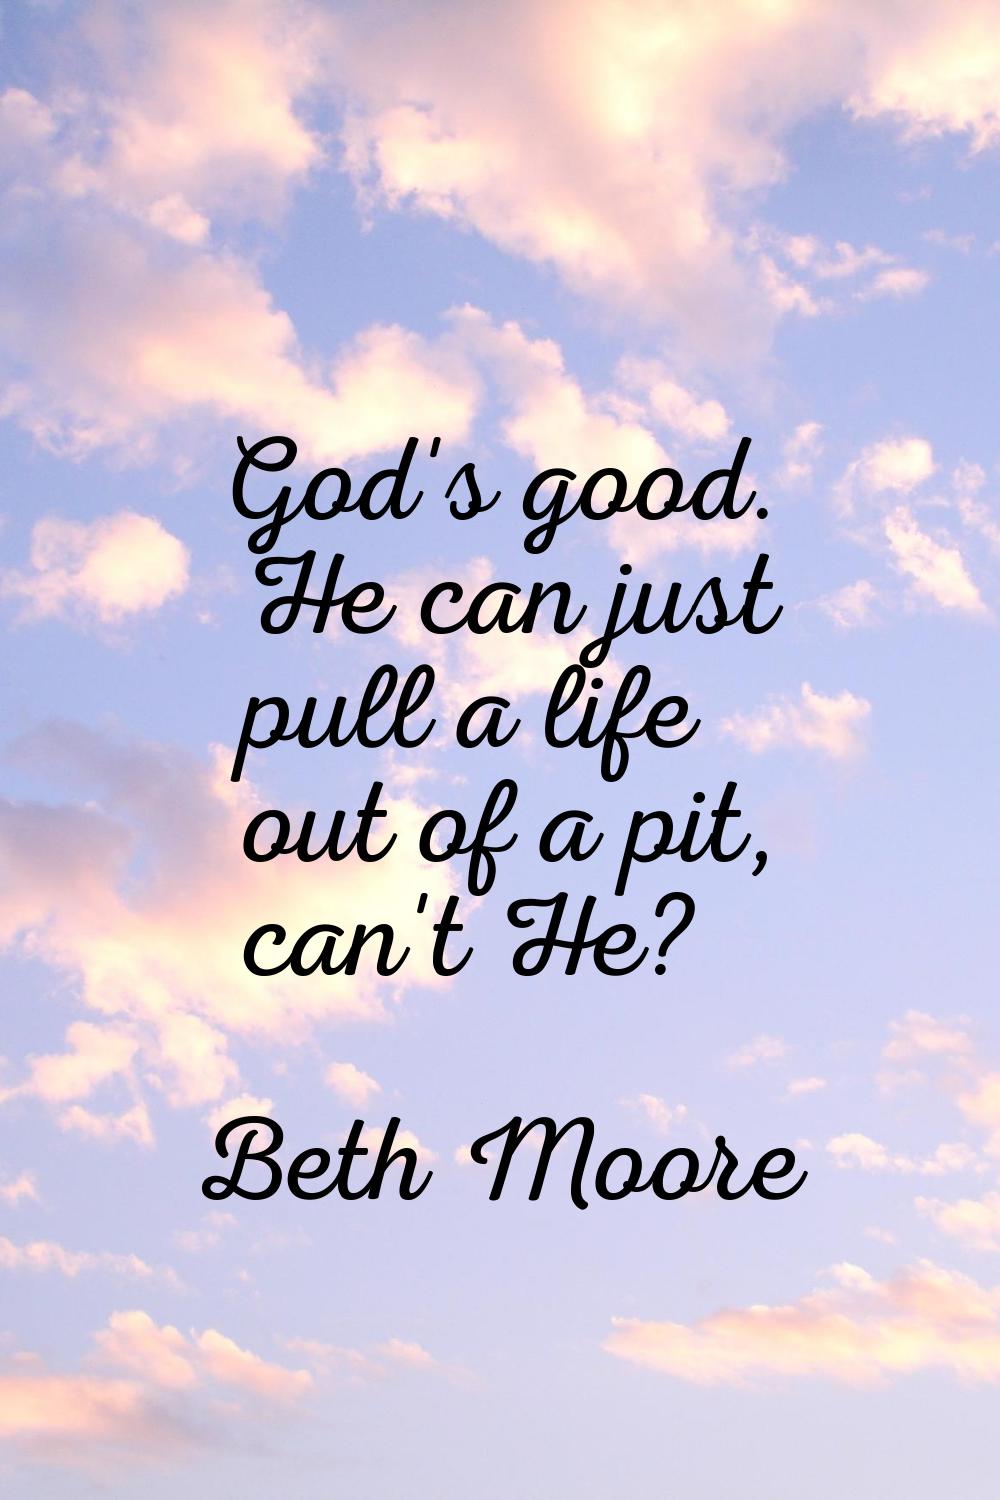 God's good. He can just pull a life out of a pit, can't He?